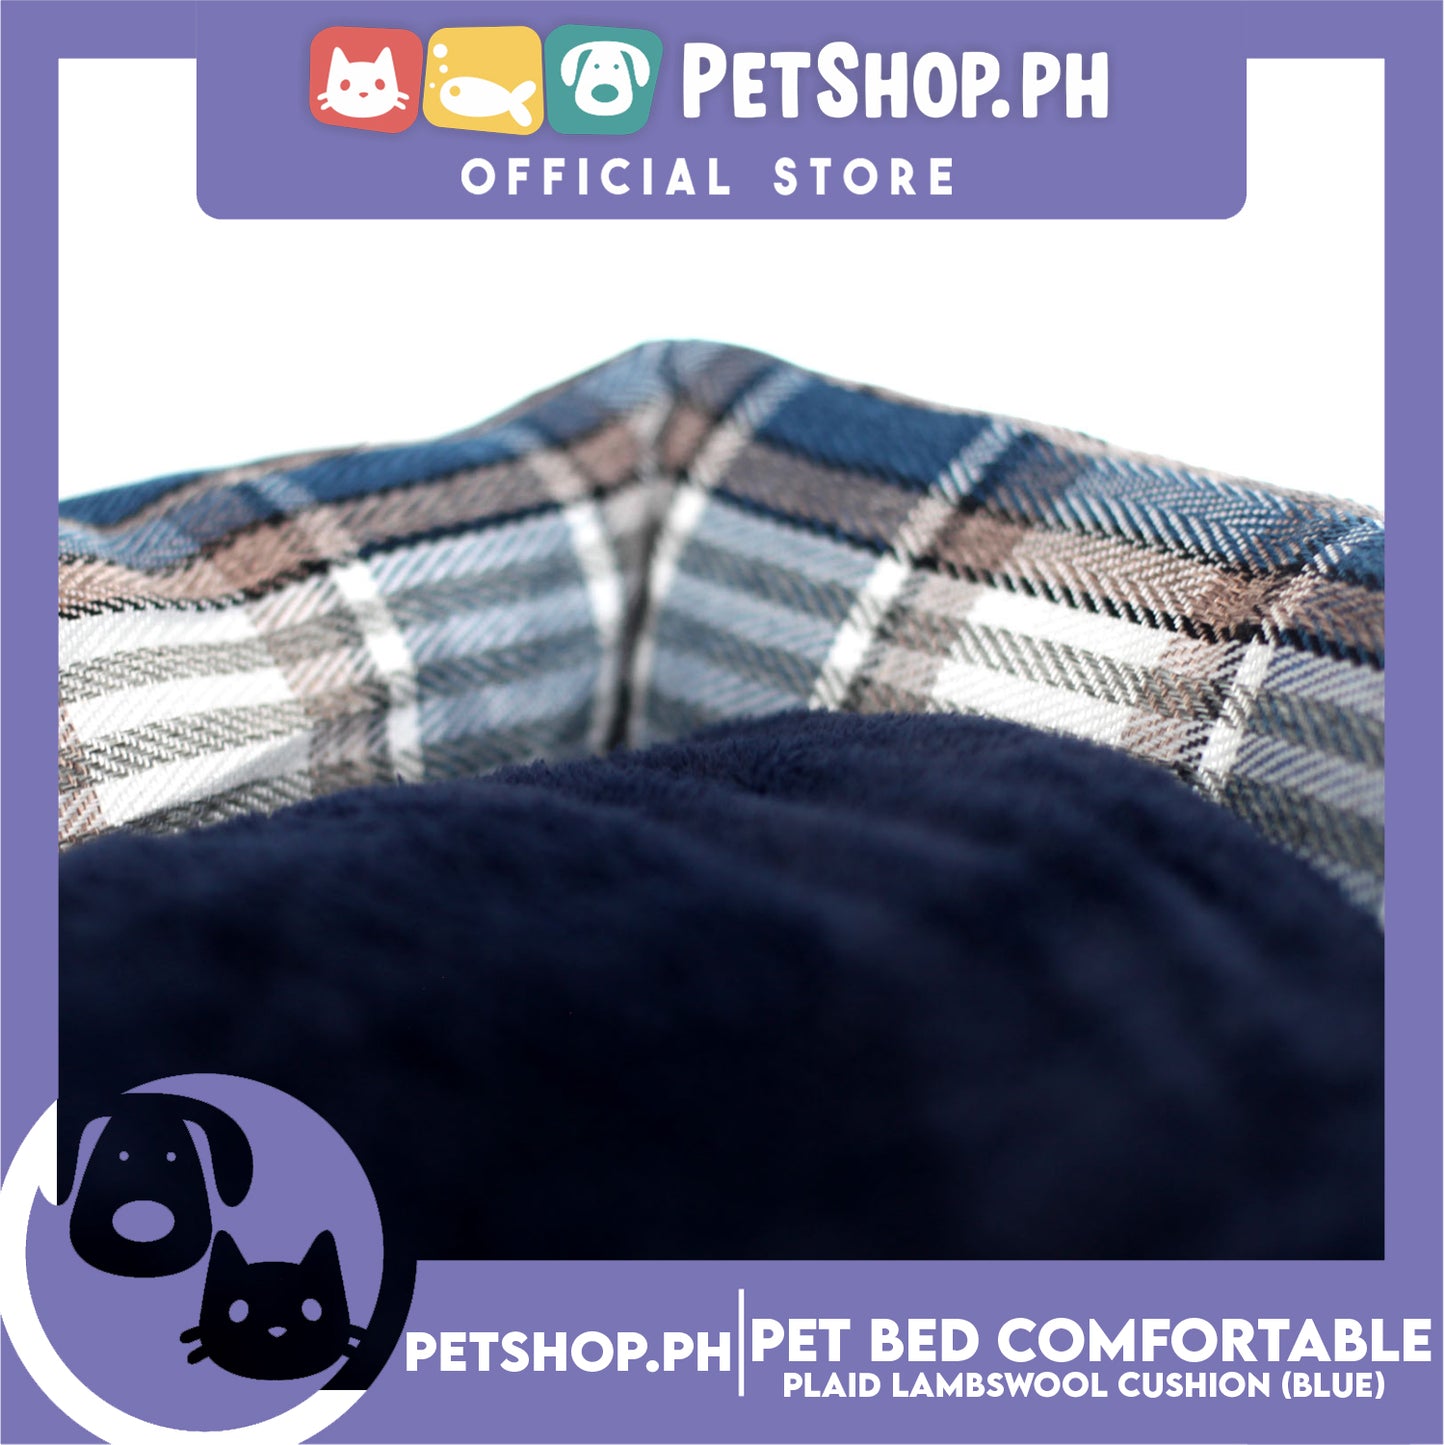 Pet Bed Comfortable Sleeping Bed Plaid Cotton Design with Lambswool Cushion 70x53x11cm Large (Blue)